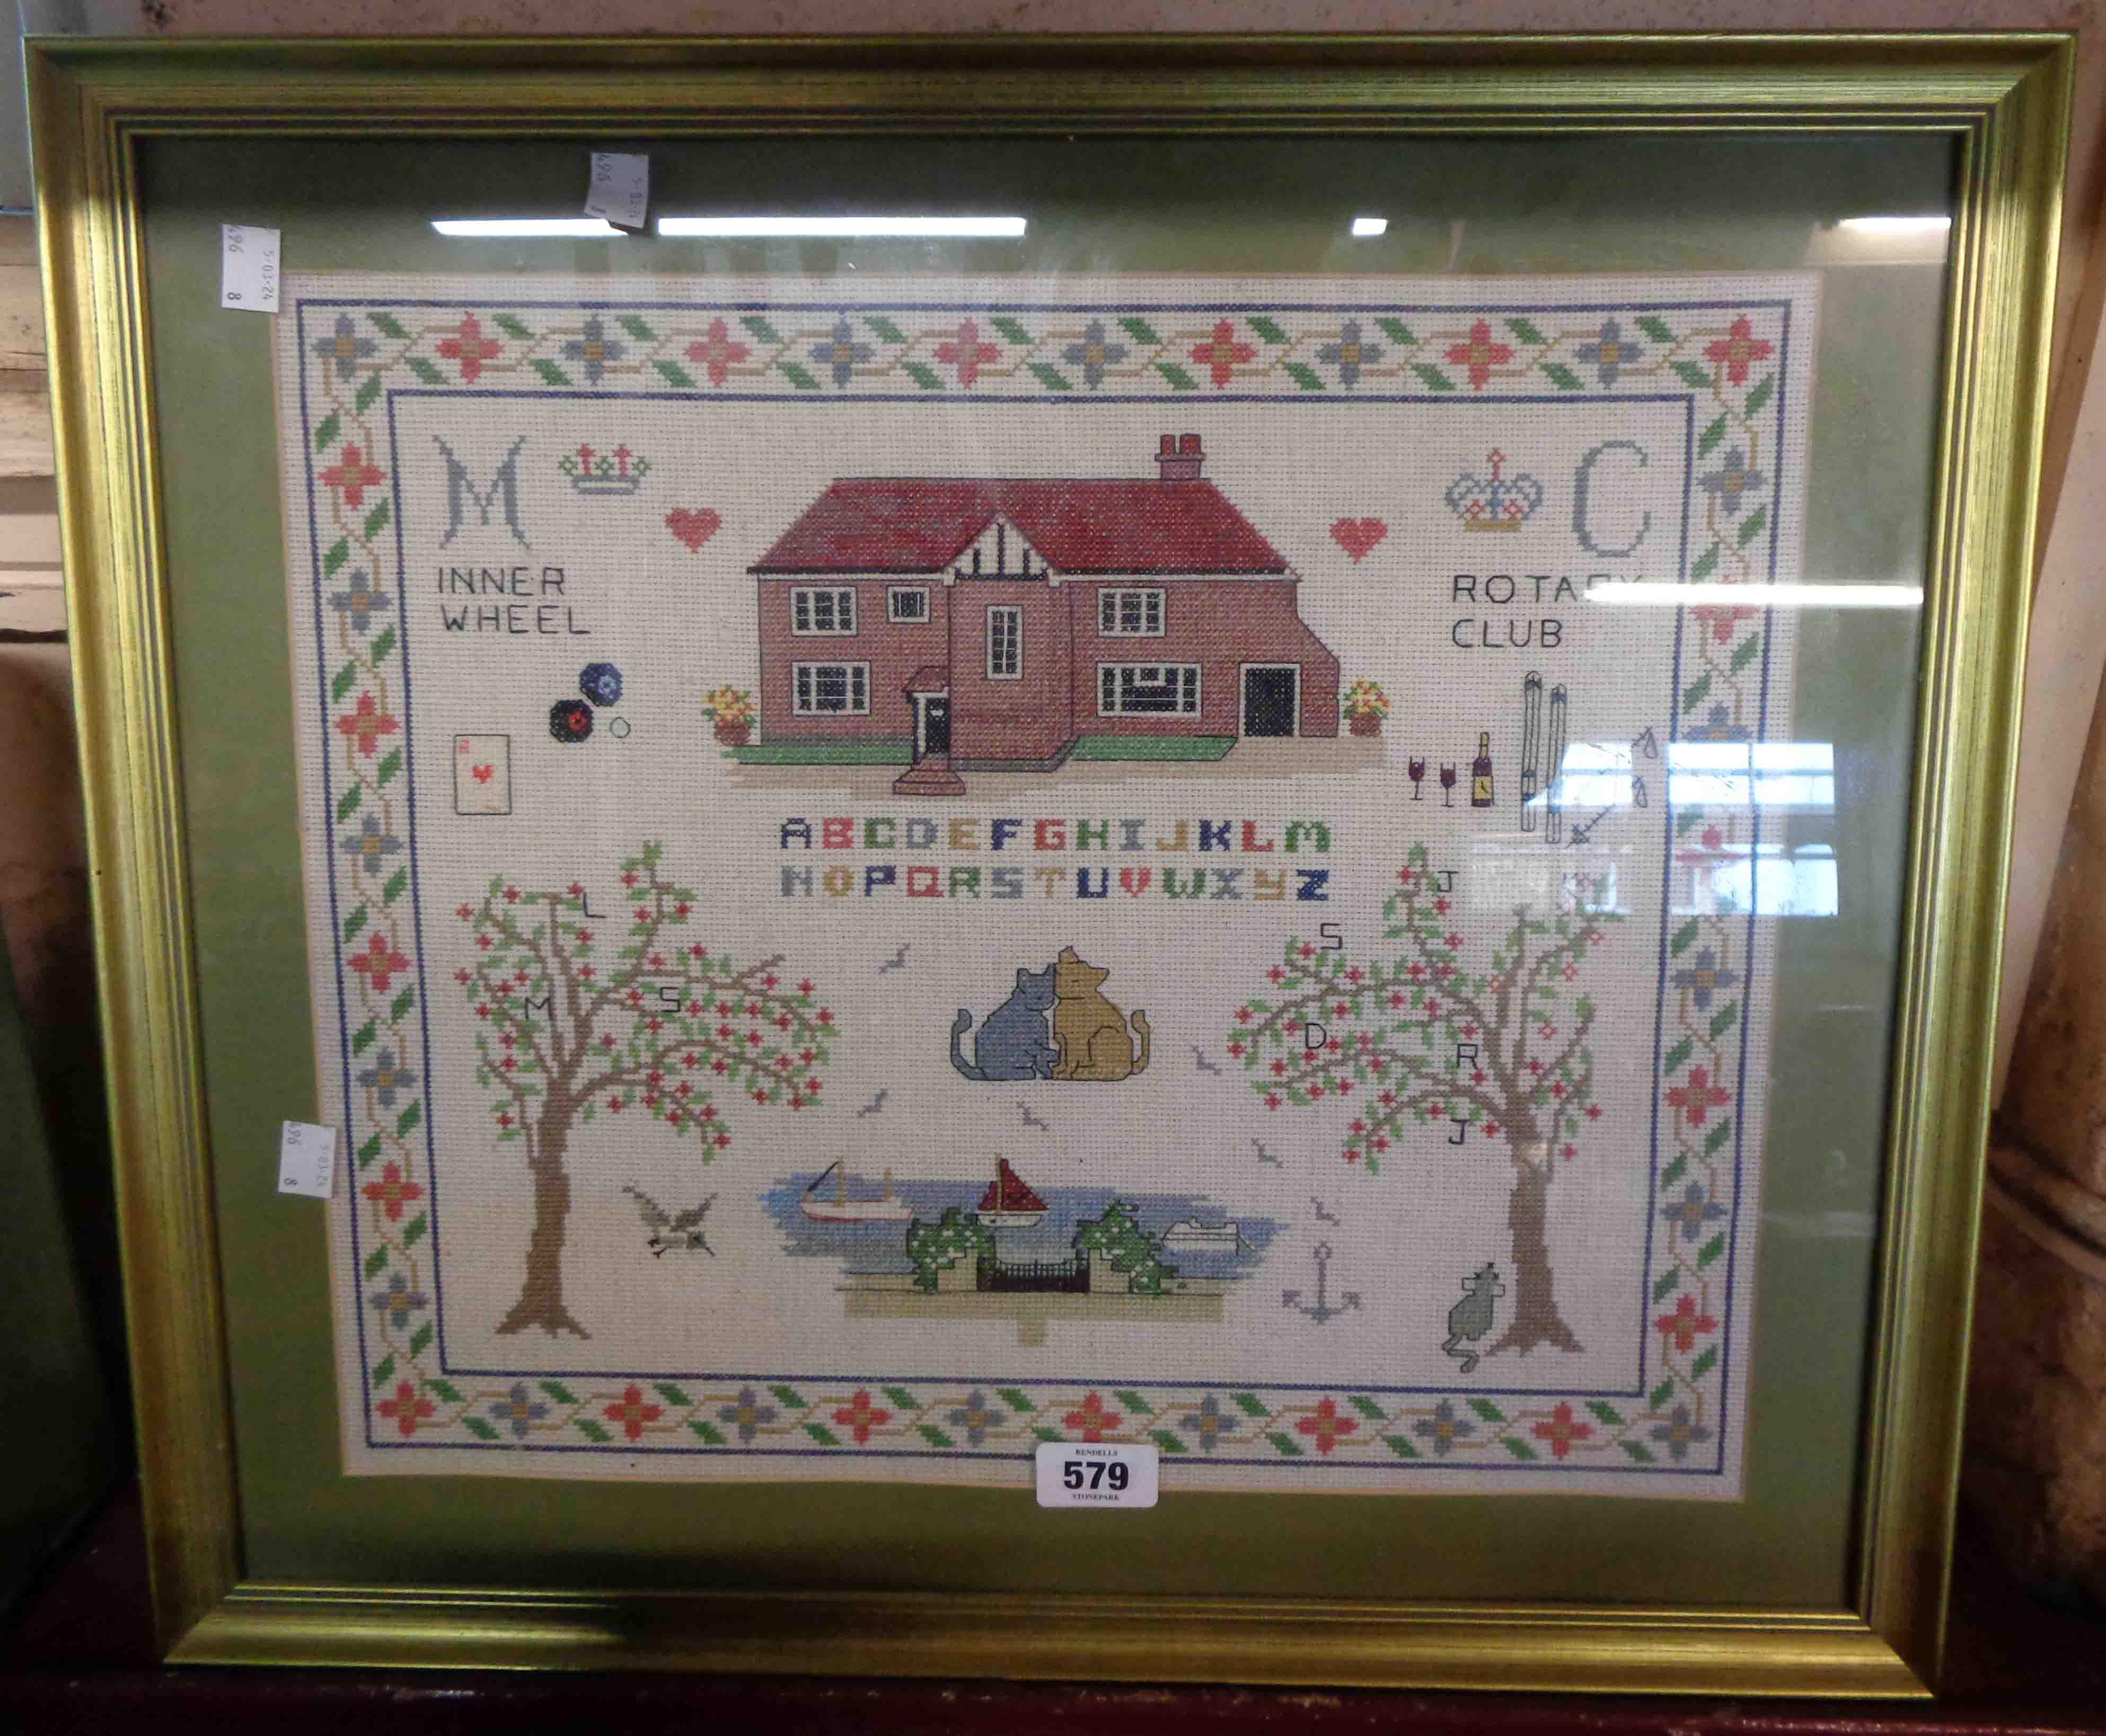 A framed 20th Century Rotary Club (Inner Wheel) sampler with building, trees and text, etc.